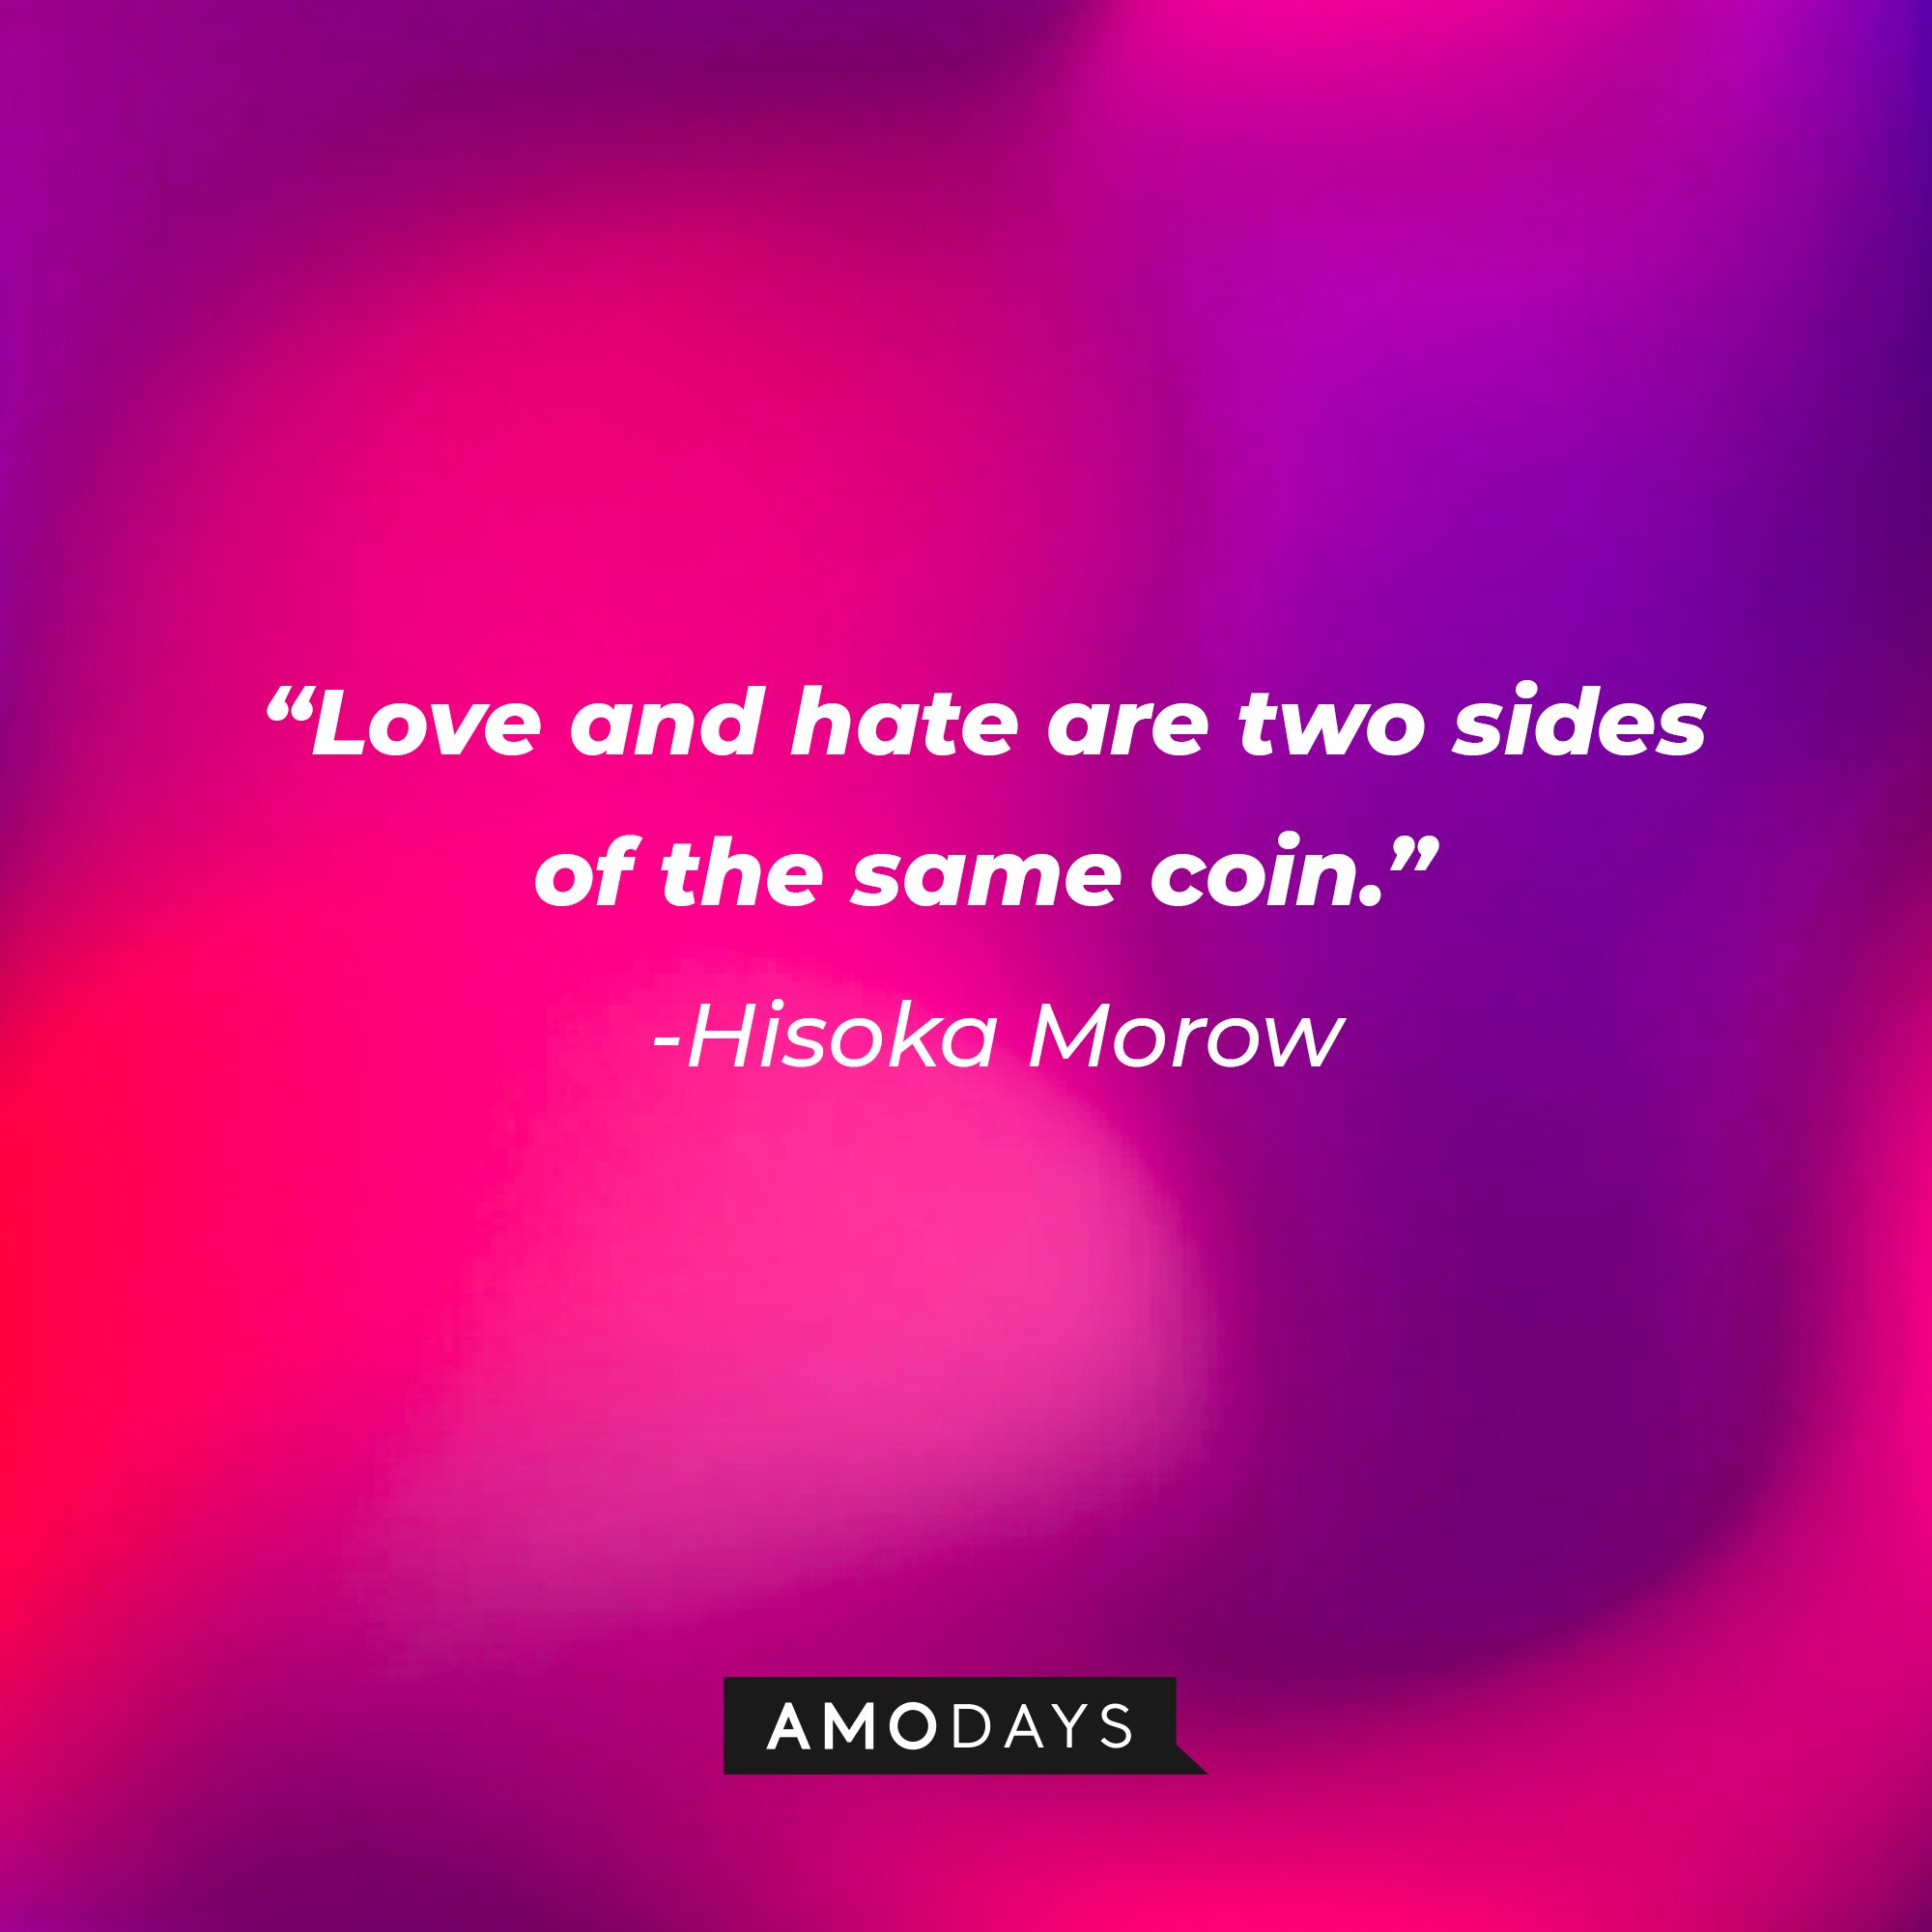 Hisoka Morow’s quote: "Love and hate are two sides of the same coin." | Image: AmoDays